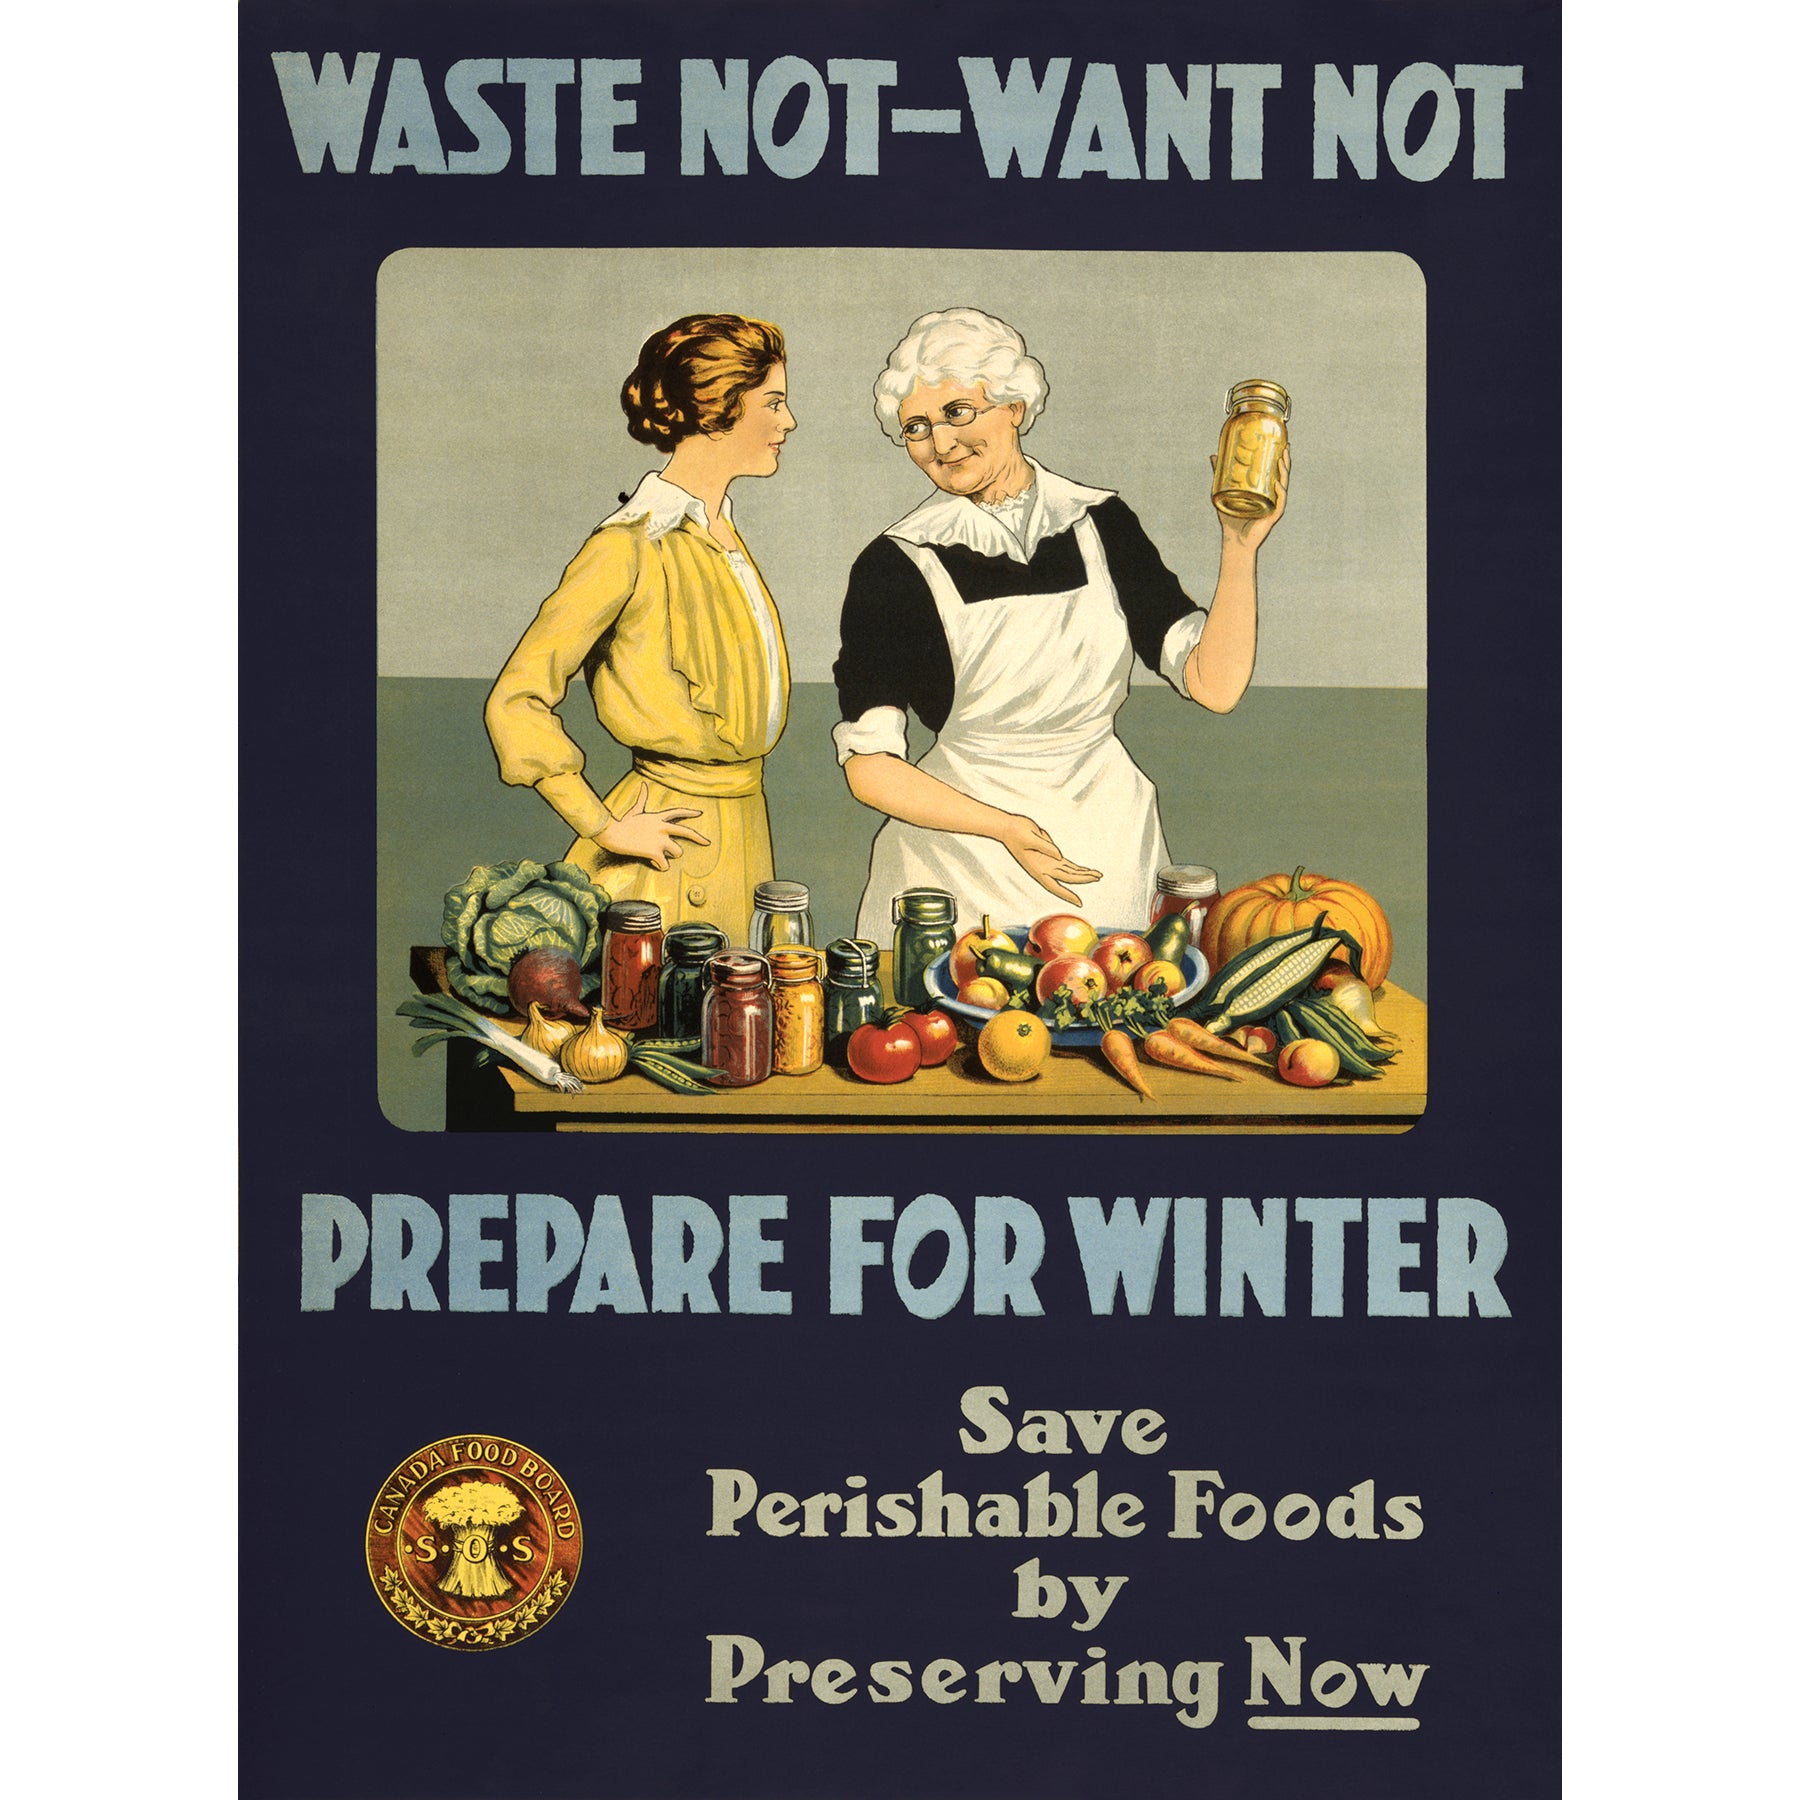 A vintage poster featuring the slogan "Waste not, want not, prepare for winter"